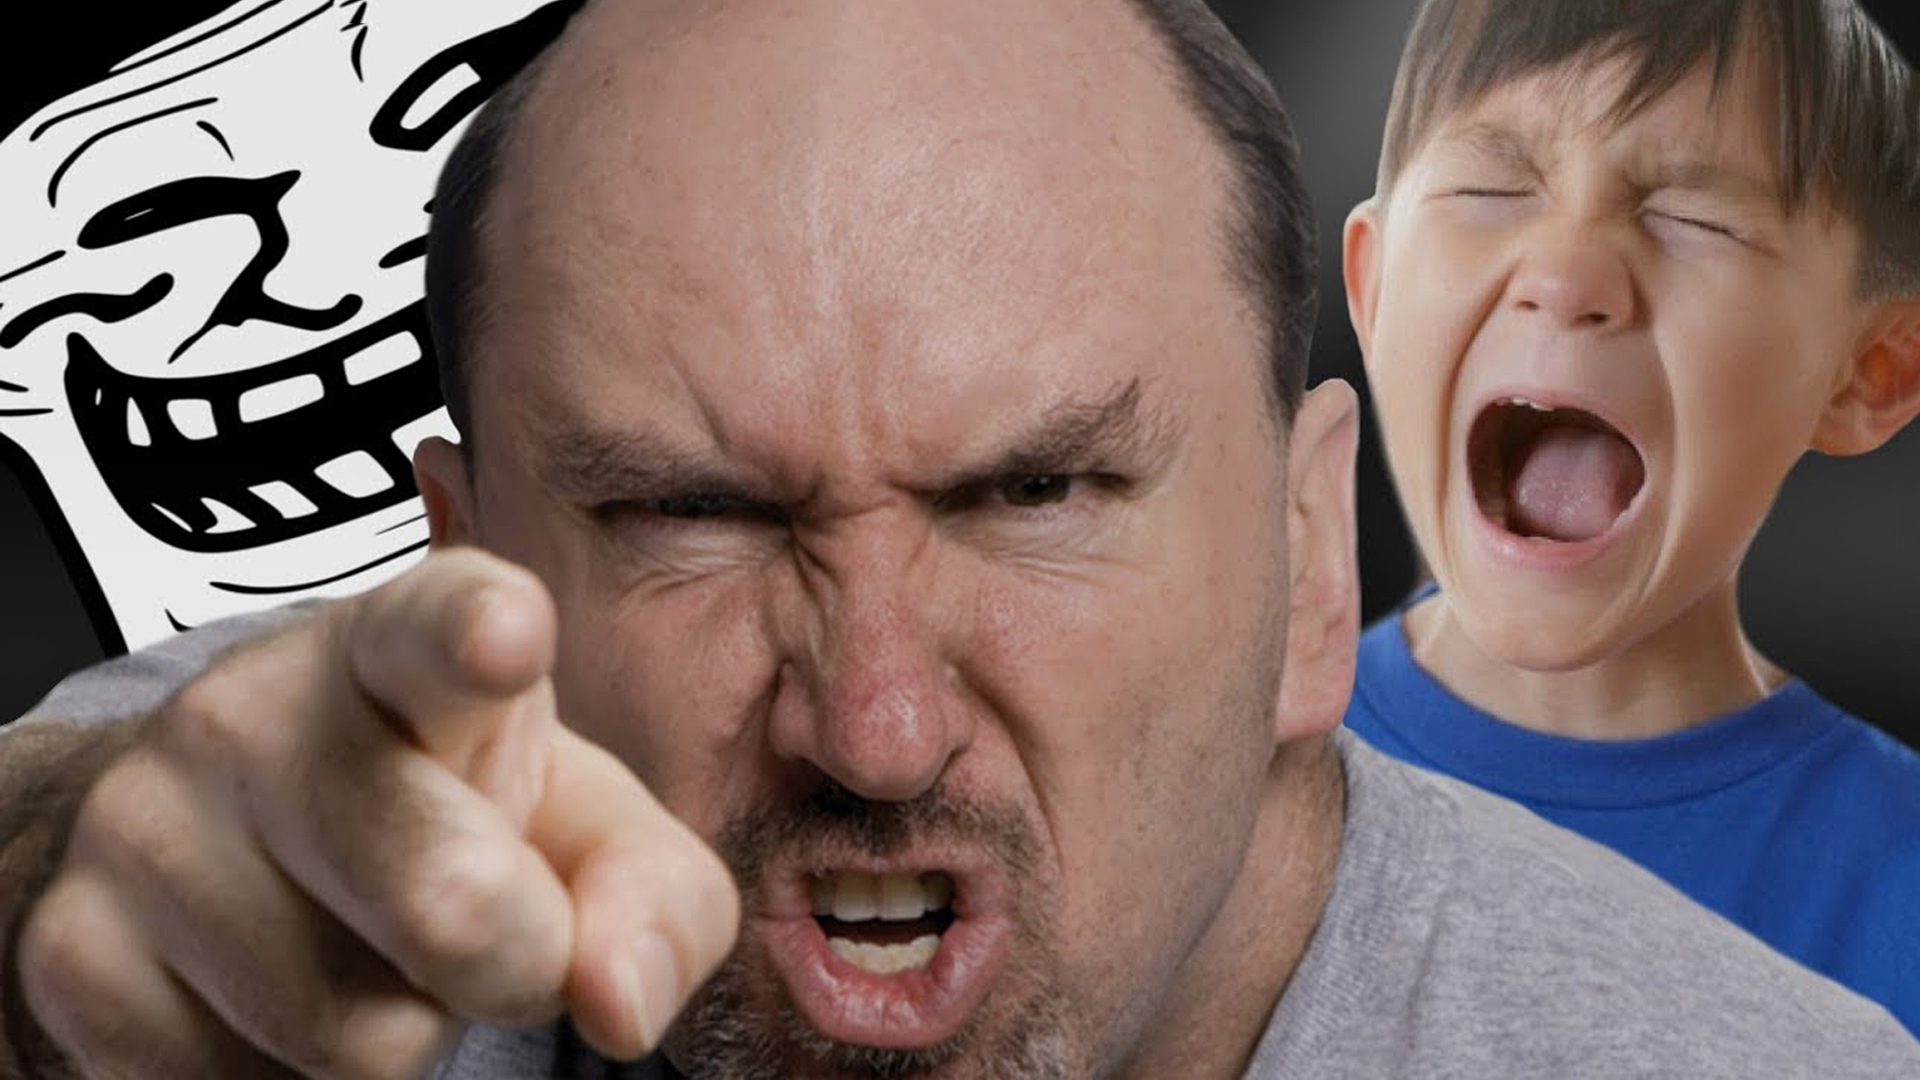 Daddy vs daddy. Angry dad. Angry Angry dad. Dad vs son игра. Angry outburst.